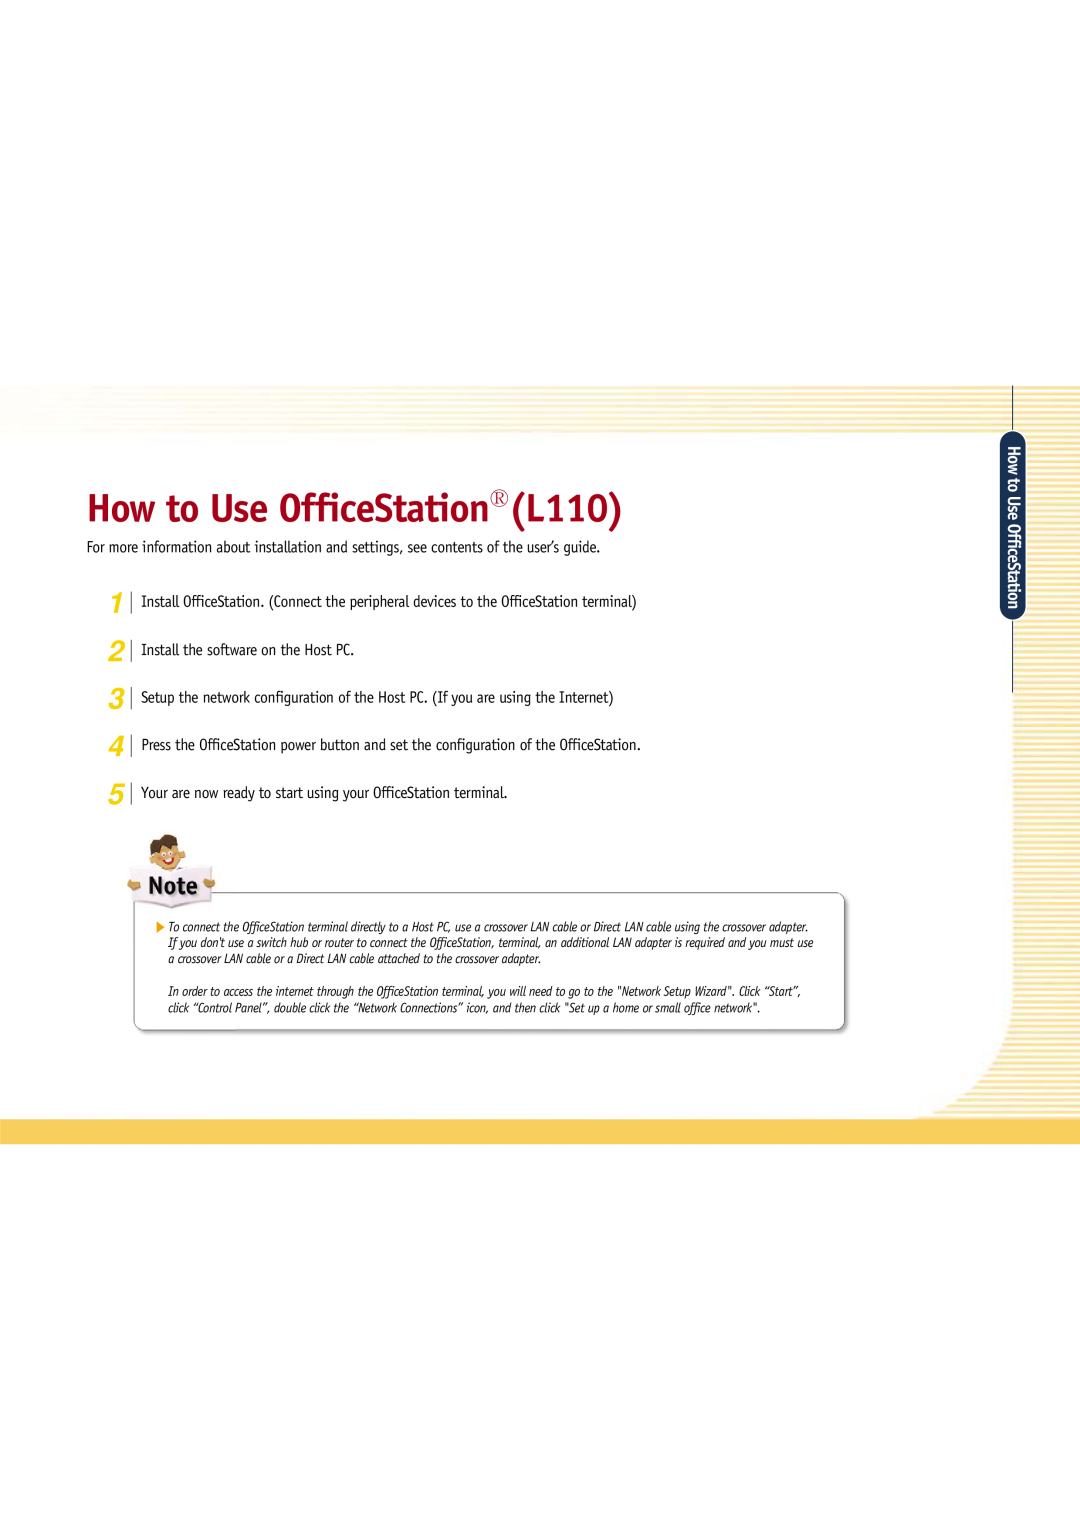 Gateway manual How to Use OfficeStation L110, Install the software on the Host PC 